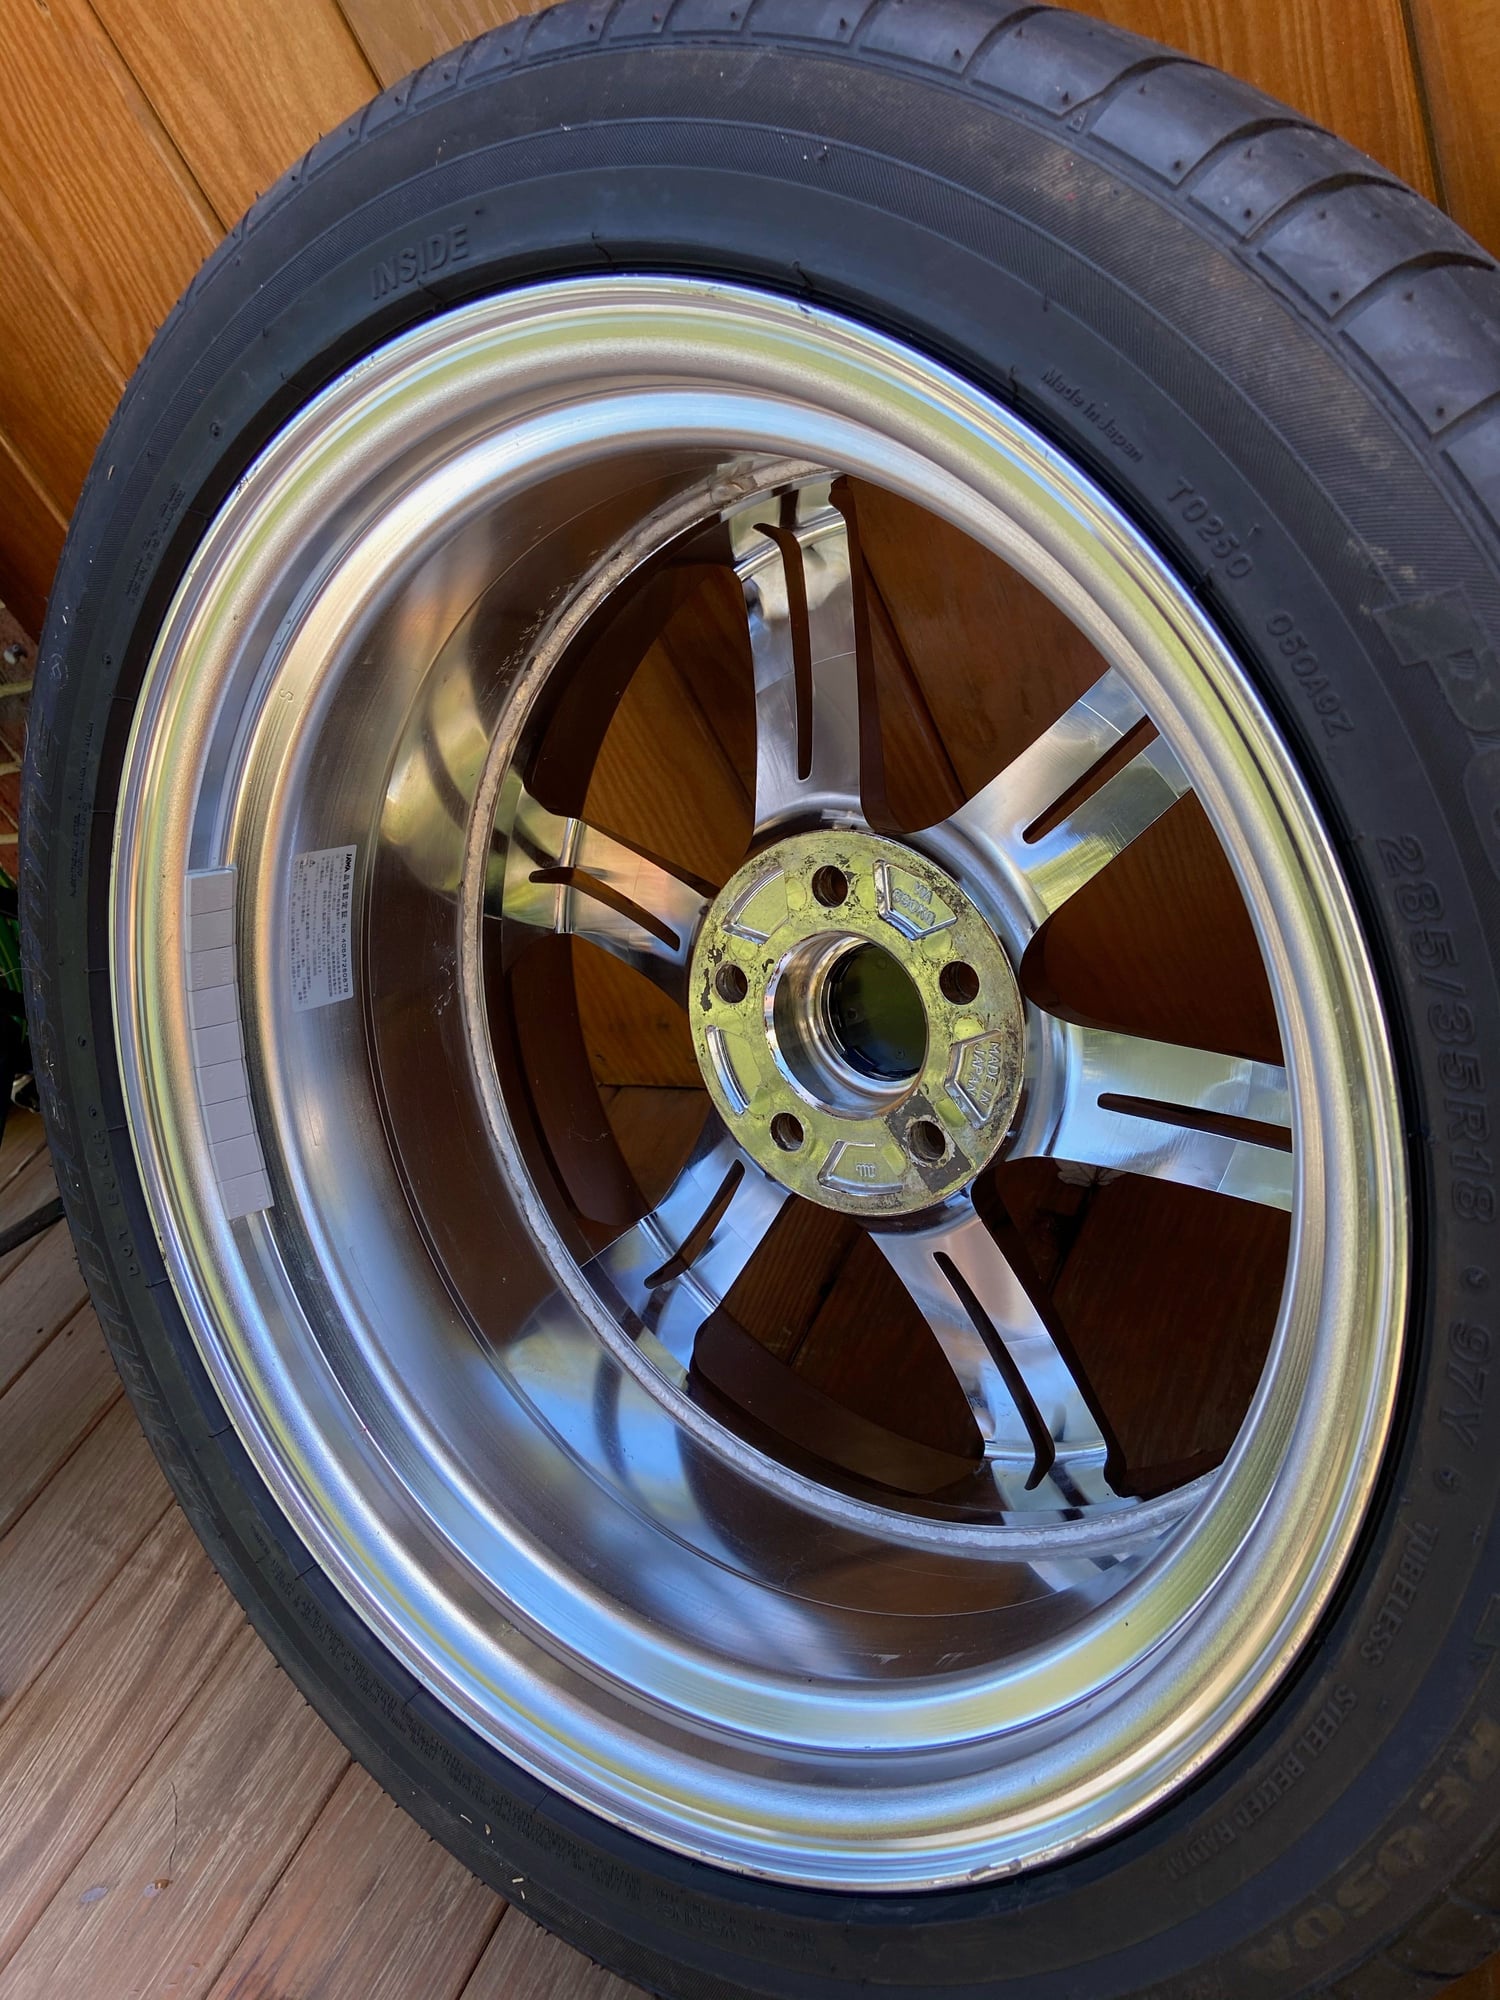 Wheels and Tires/Axles - 18" Do-Luck Double Six Wheels - Used - Virginia Beach, VA 23450, United States